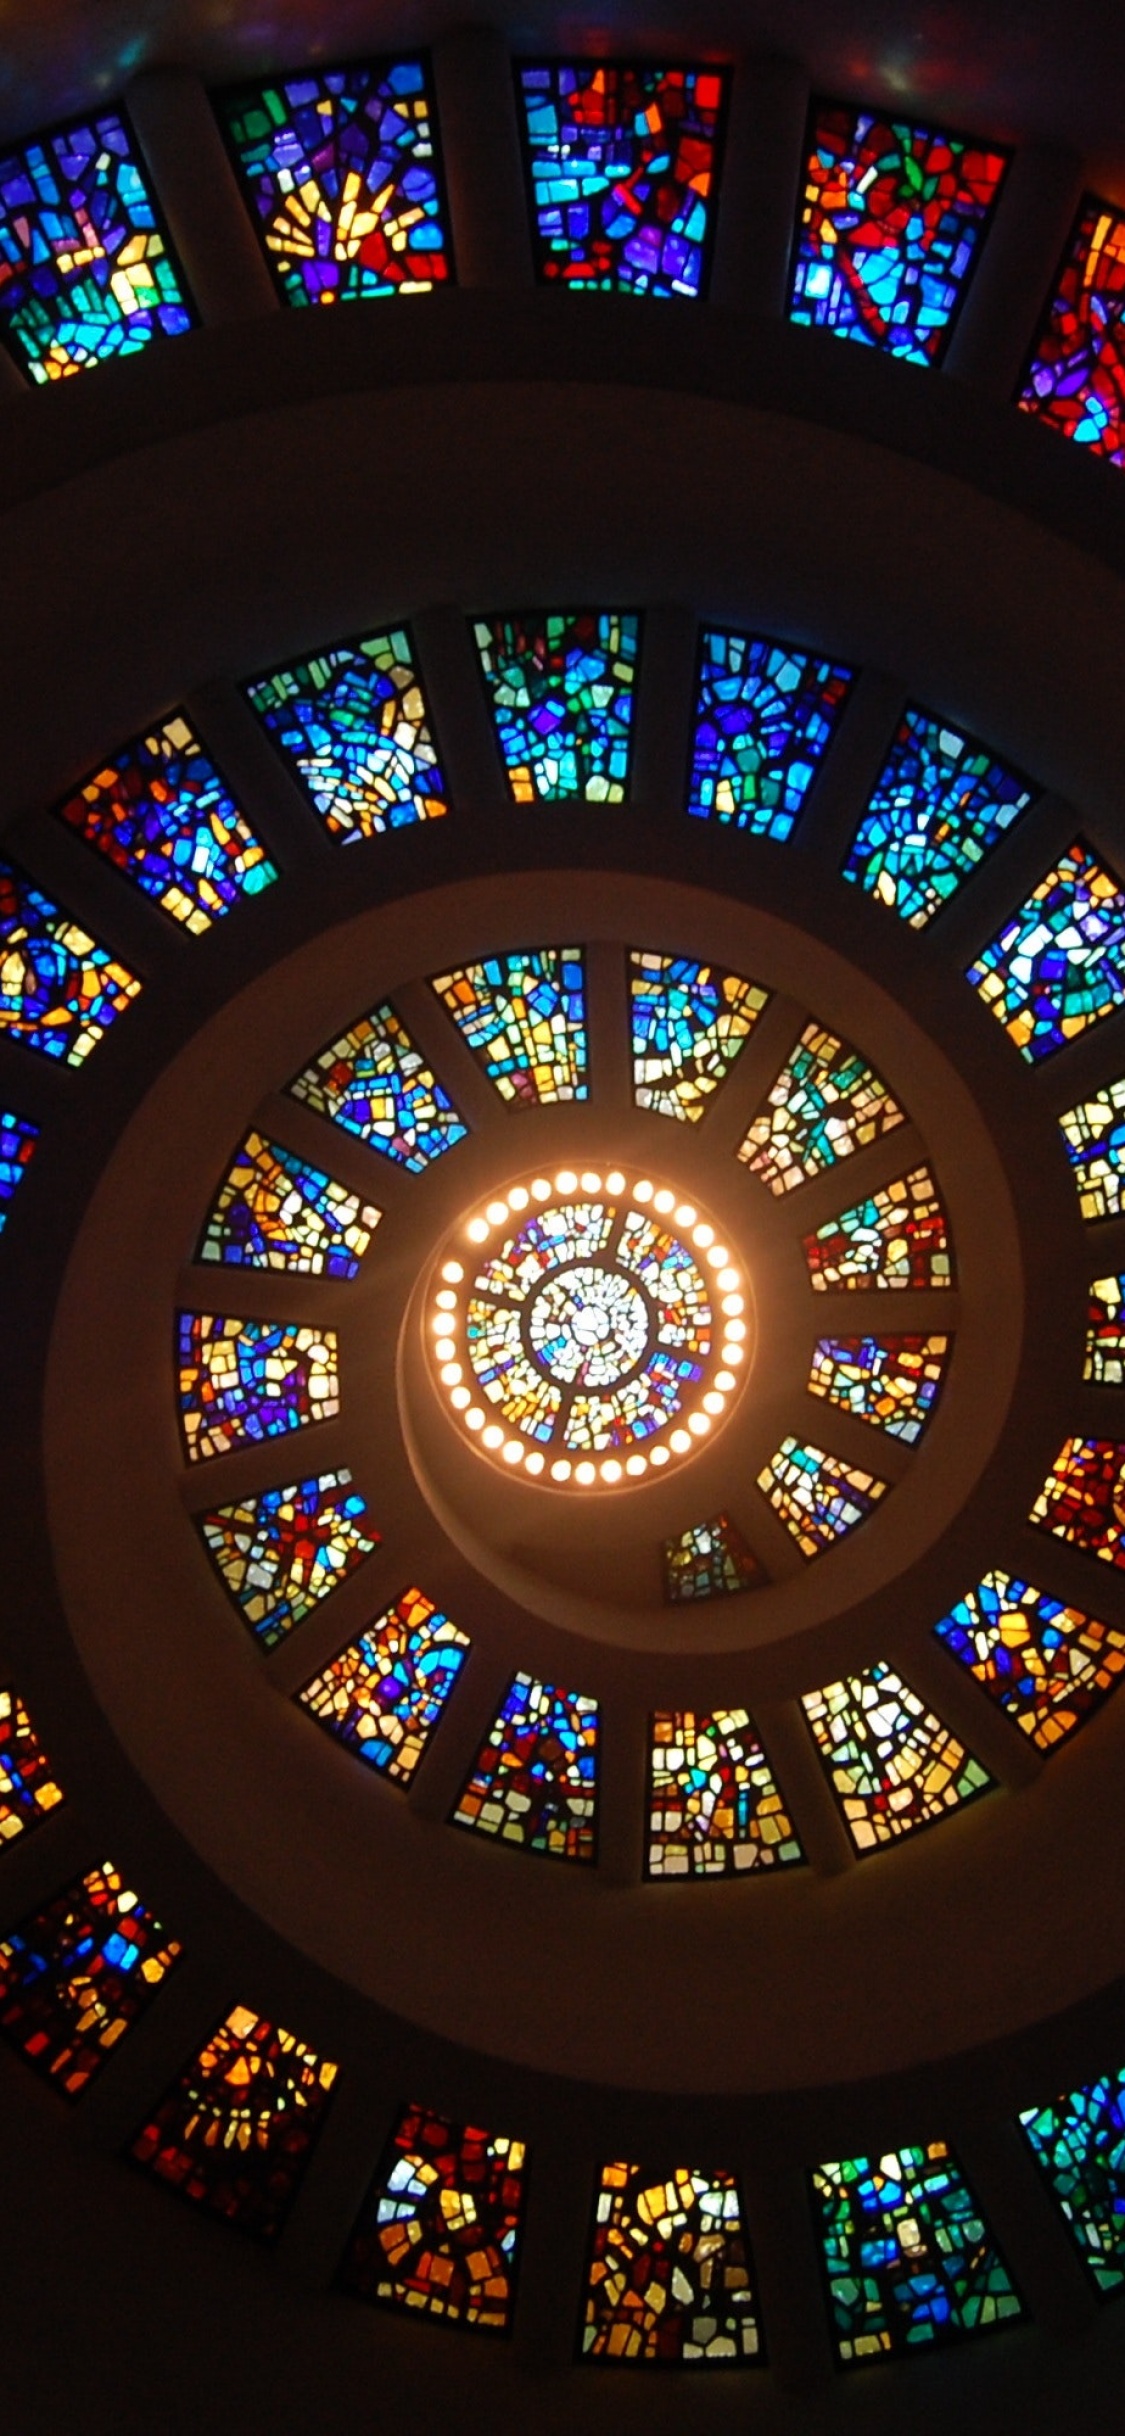 Spiral ceiling 4K Wallpaper, Stained glass, Church, HD, Photography, #1251